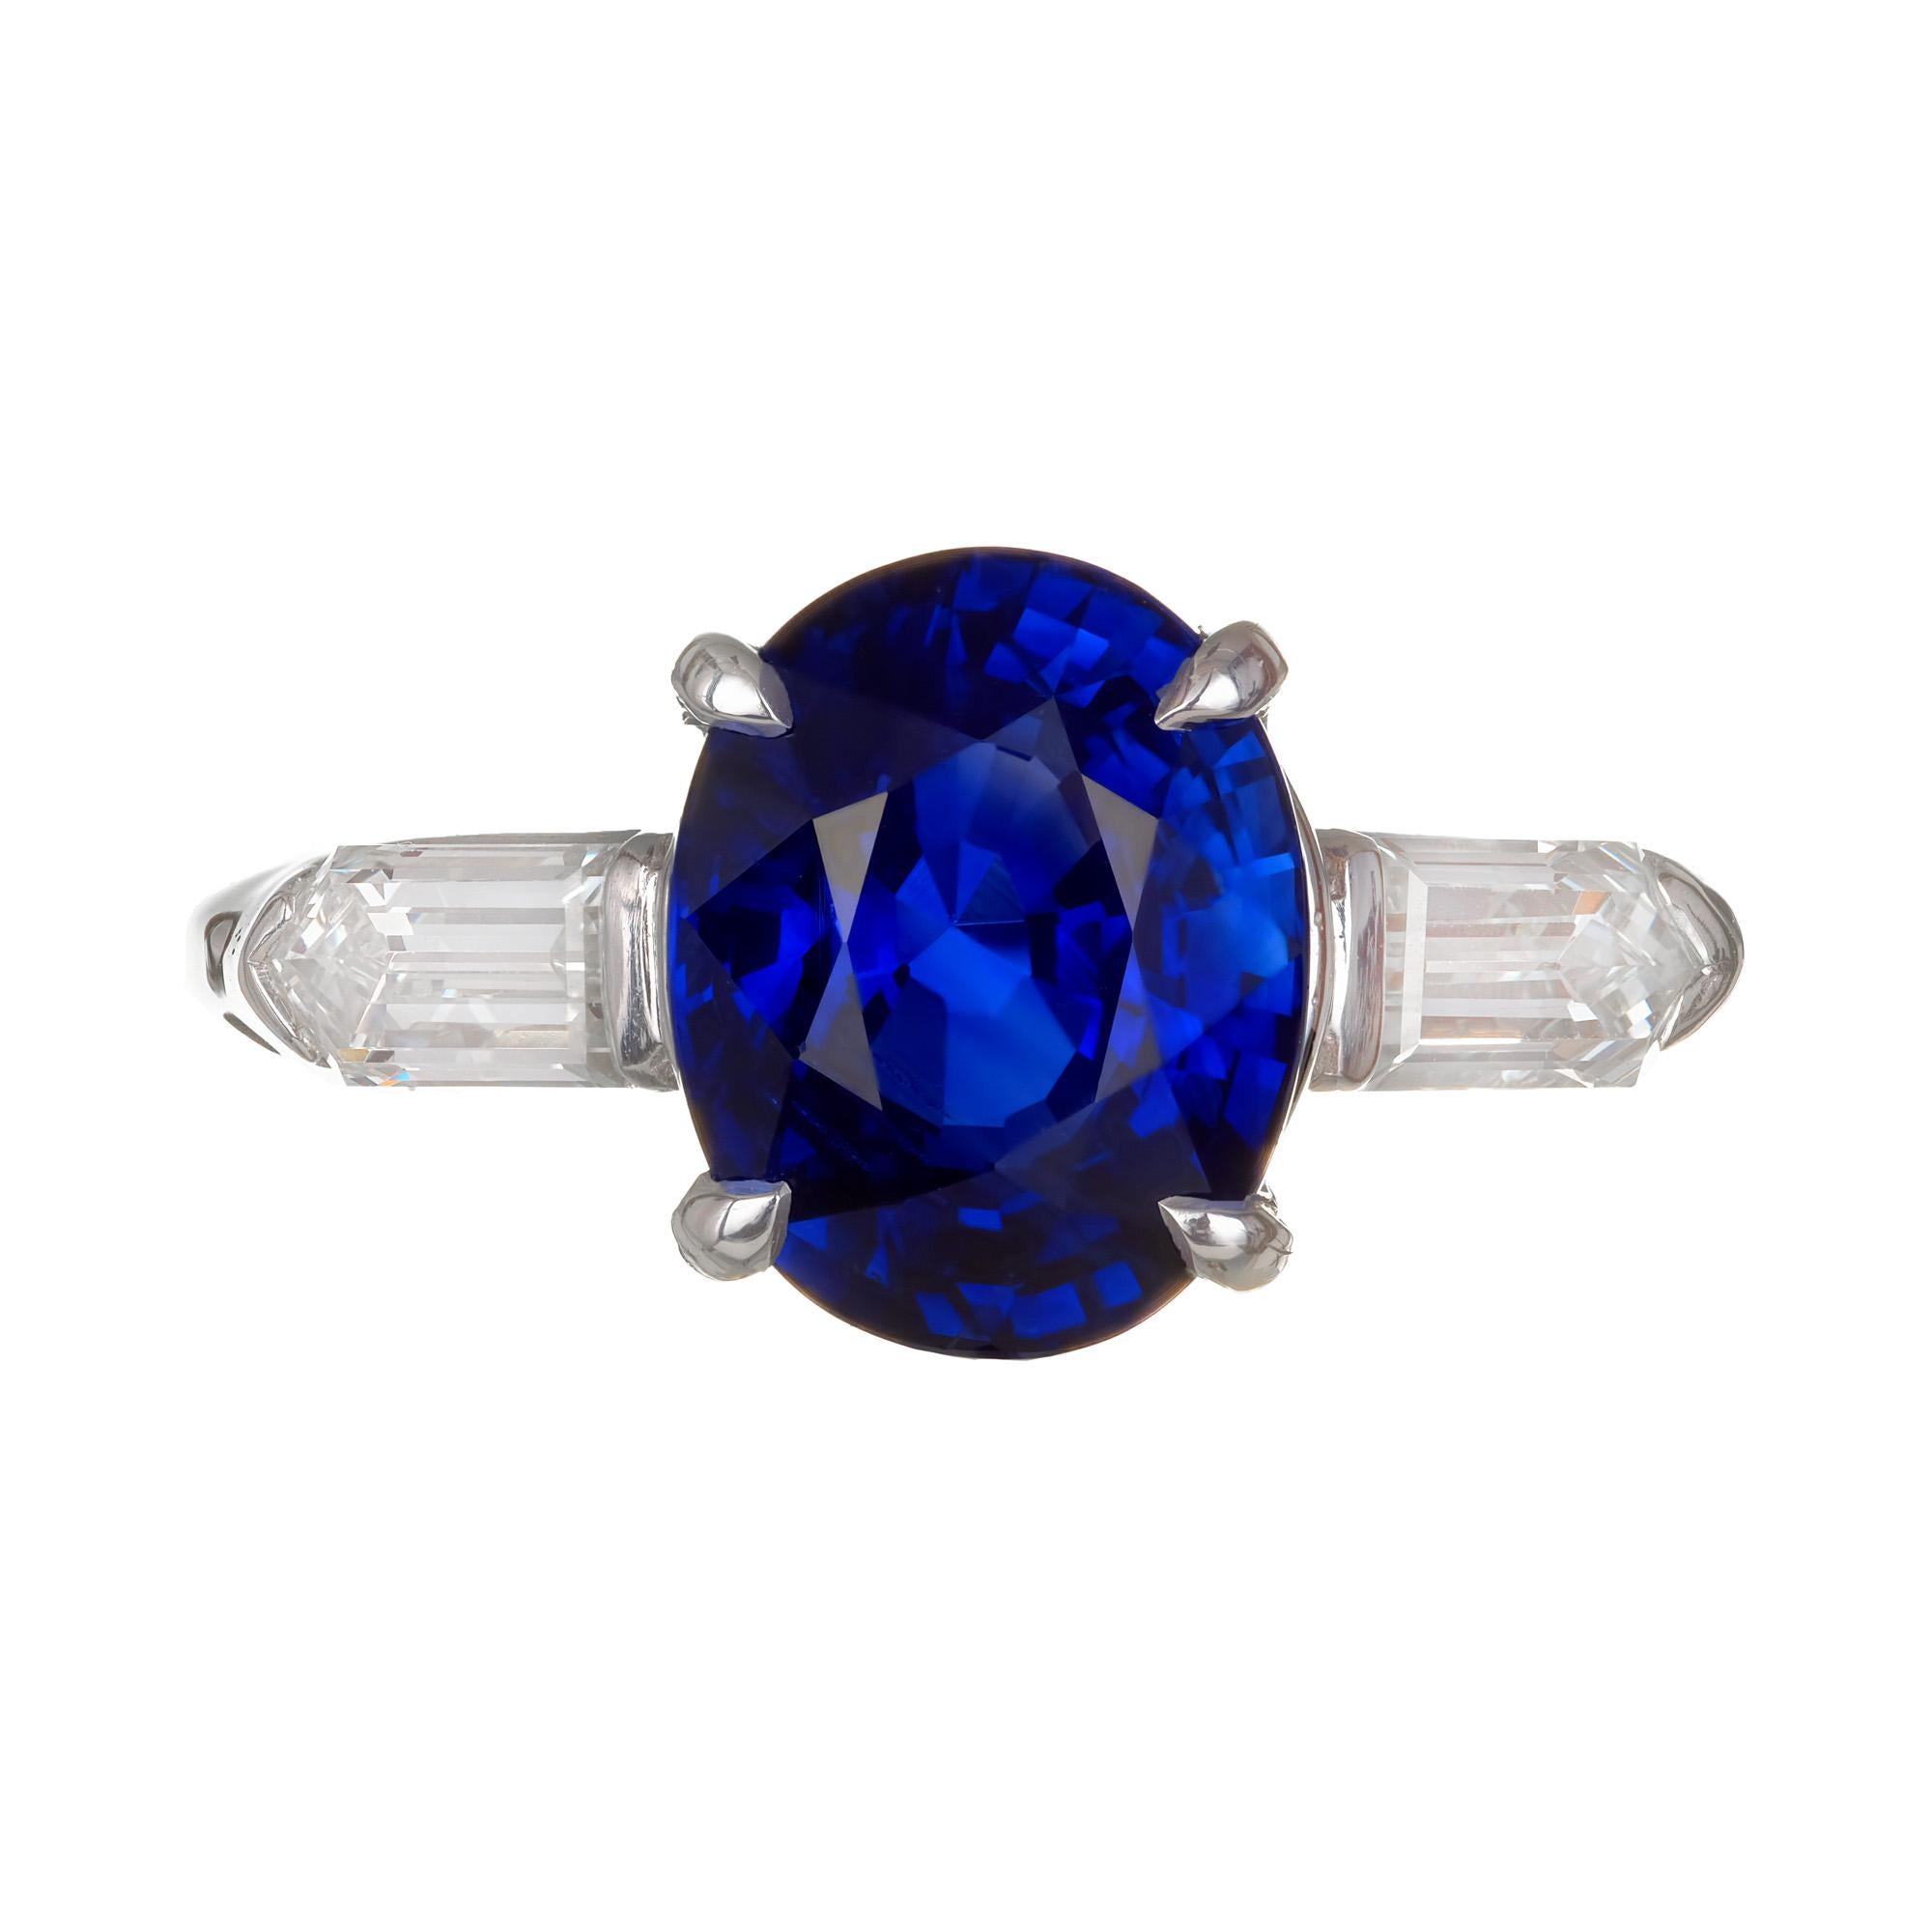 Bright blue oval sapphire and diamond three-stone engagement ring. 14k white gold setting accented with white bullet shaped diamonds. Circa 1950s. GIA certified oval sapphire center stone. 

1 oval blue VS-SI sapphire Approx. Total Weight 3.51cts. 